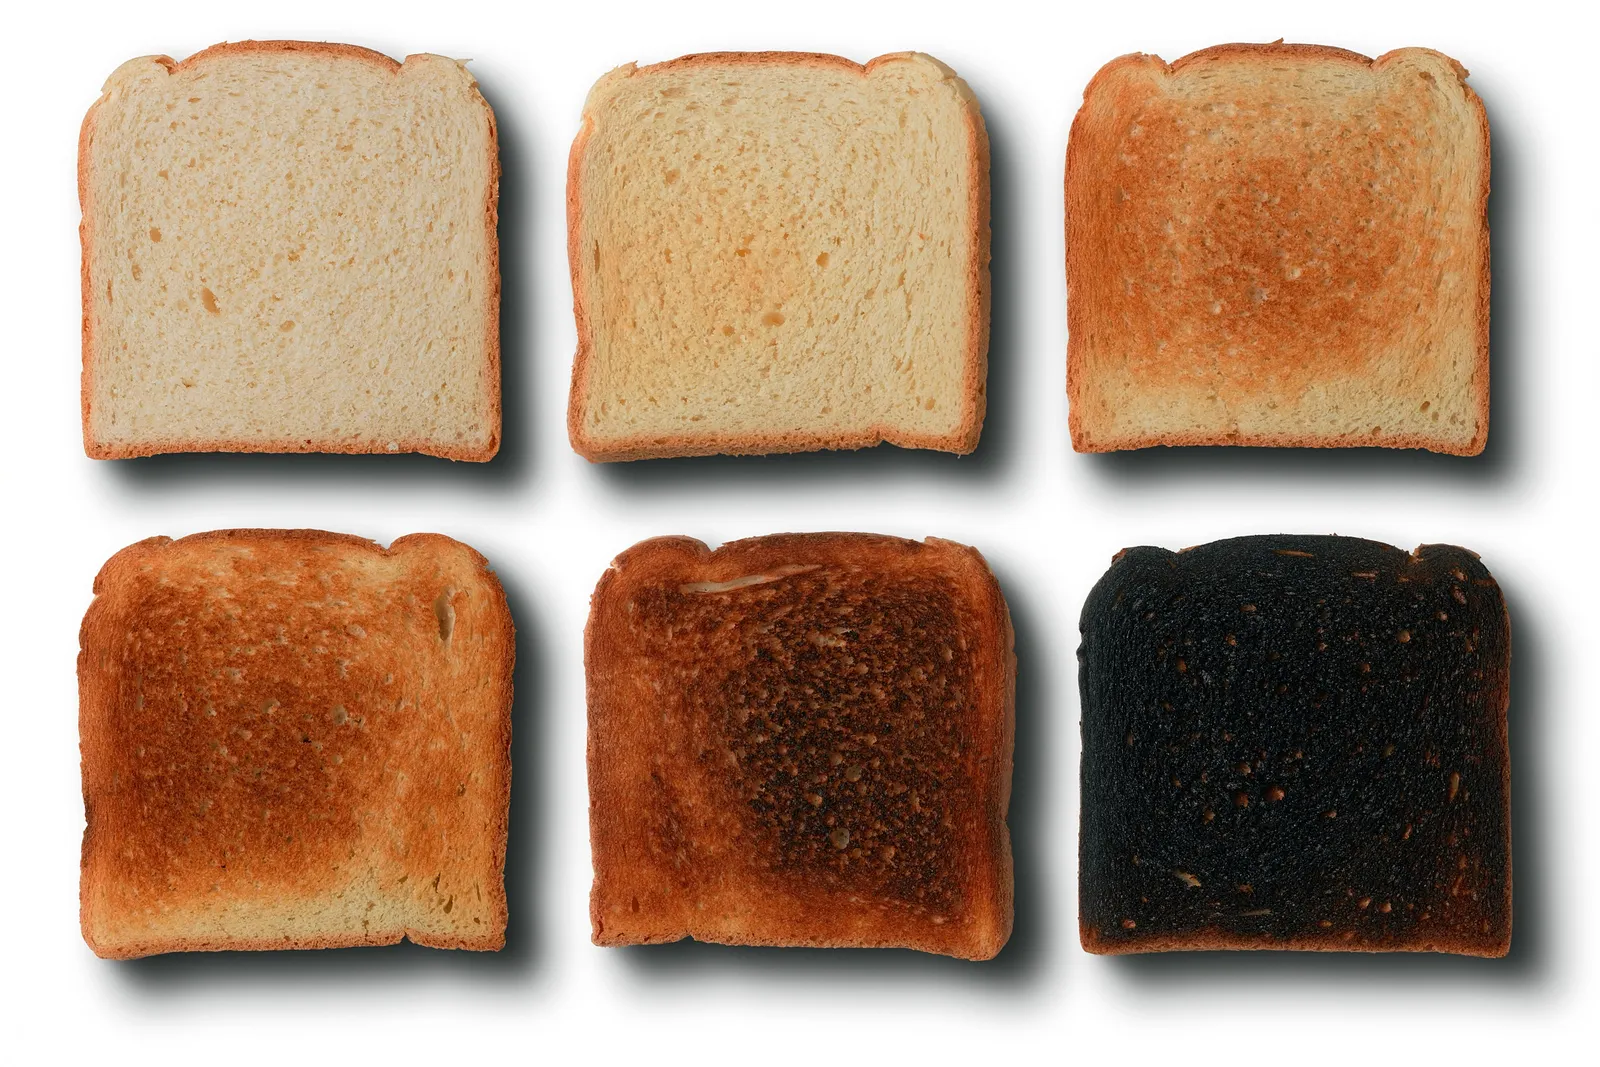 Why Food Experts Are Warning Not to Burn Your Toast, Smart News